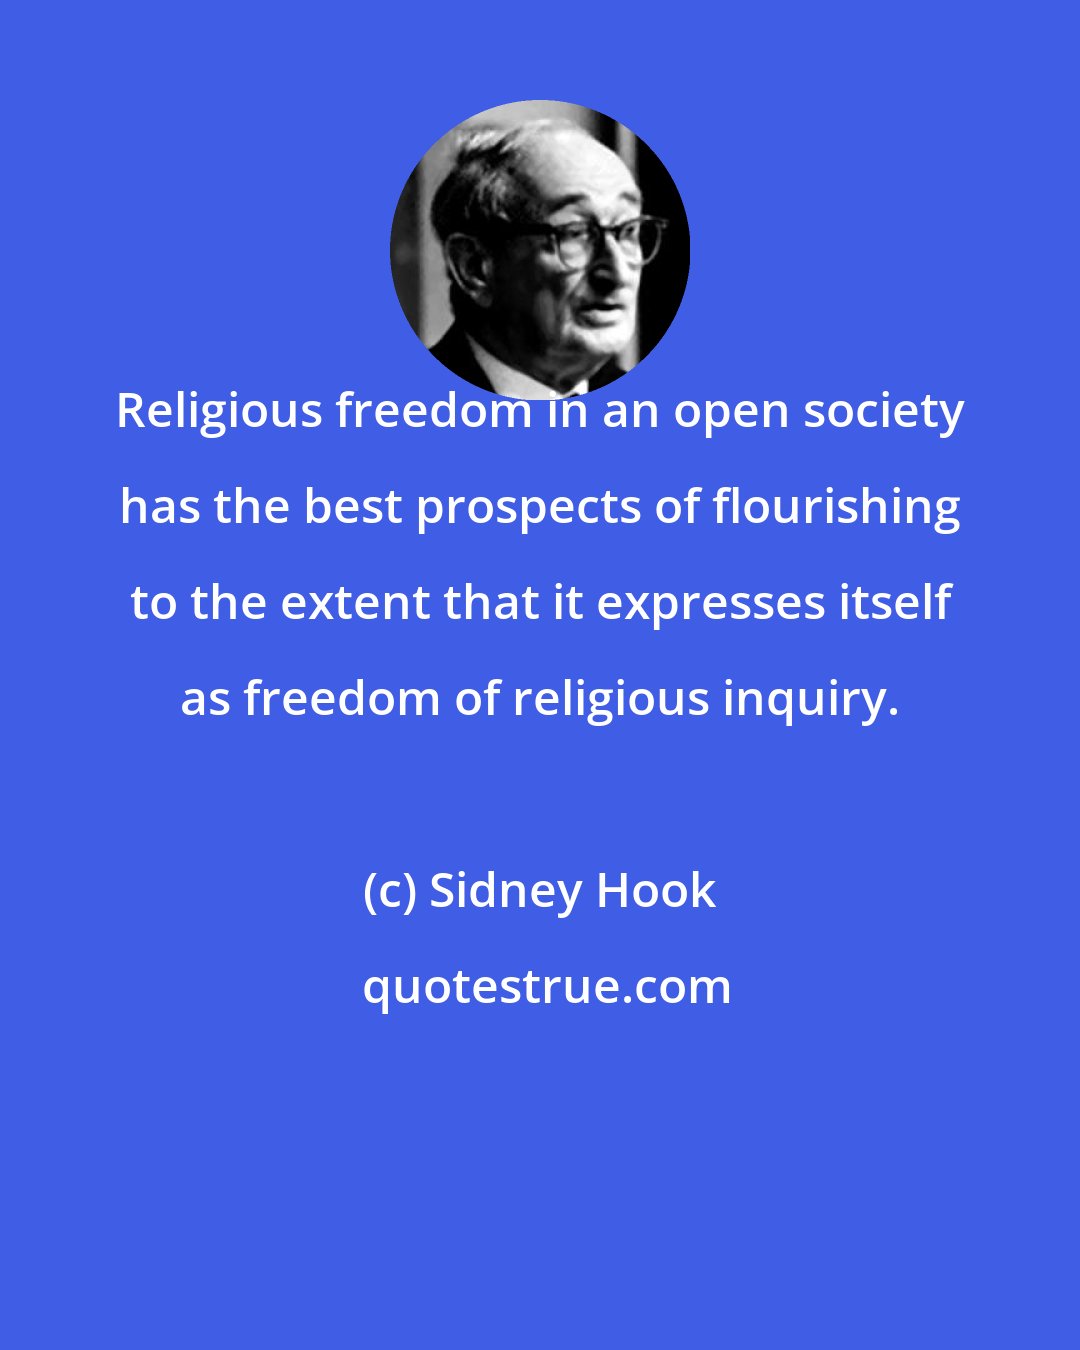 Sidney Hook: Religious freedom in an open society has the best prospects of flourishing to the extent that it expresses itself as freedom of religious inquiry.